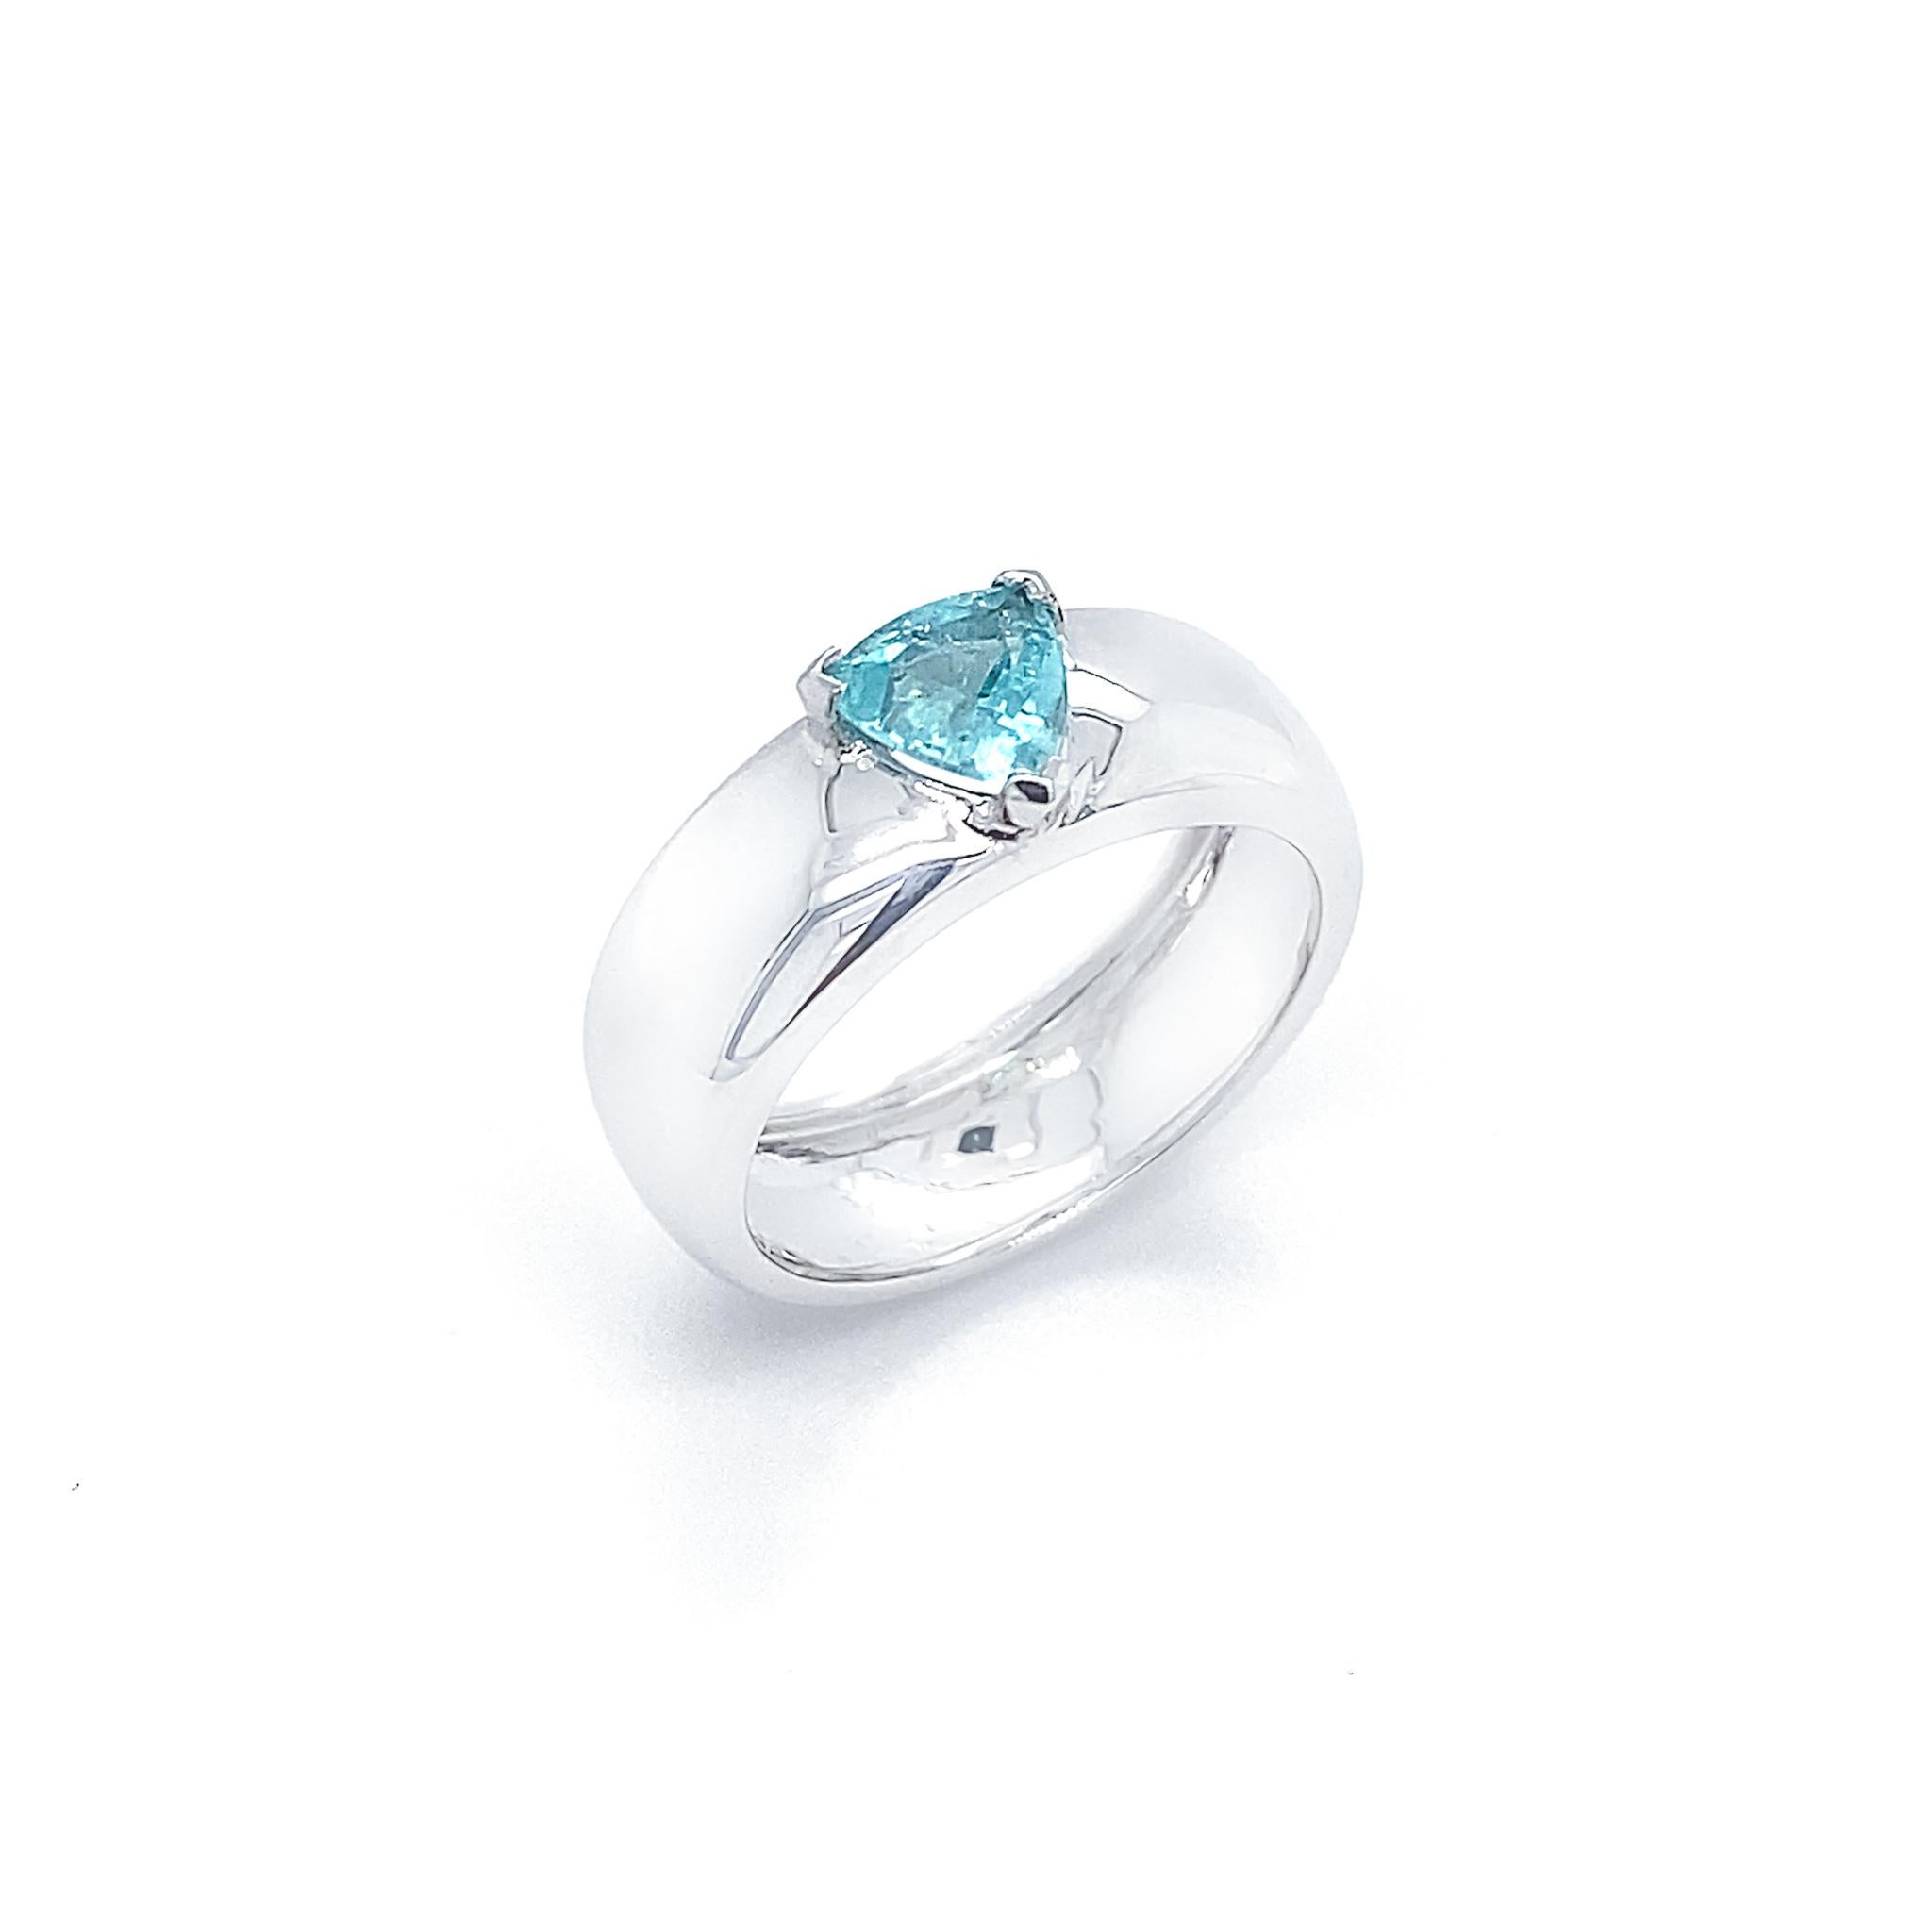 Minimal for the everyday yet still quite the statement, the neon-glow of this ICA-certified 0.67ct trillion-cut Brazilian Paraiba takes the stage on this solid 18K gold band ring. 

Set by the House of Dilys' skilled craftsmen, trained and attuned